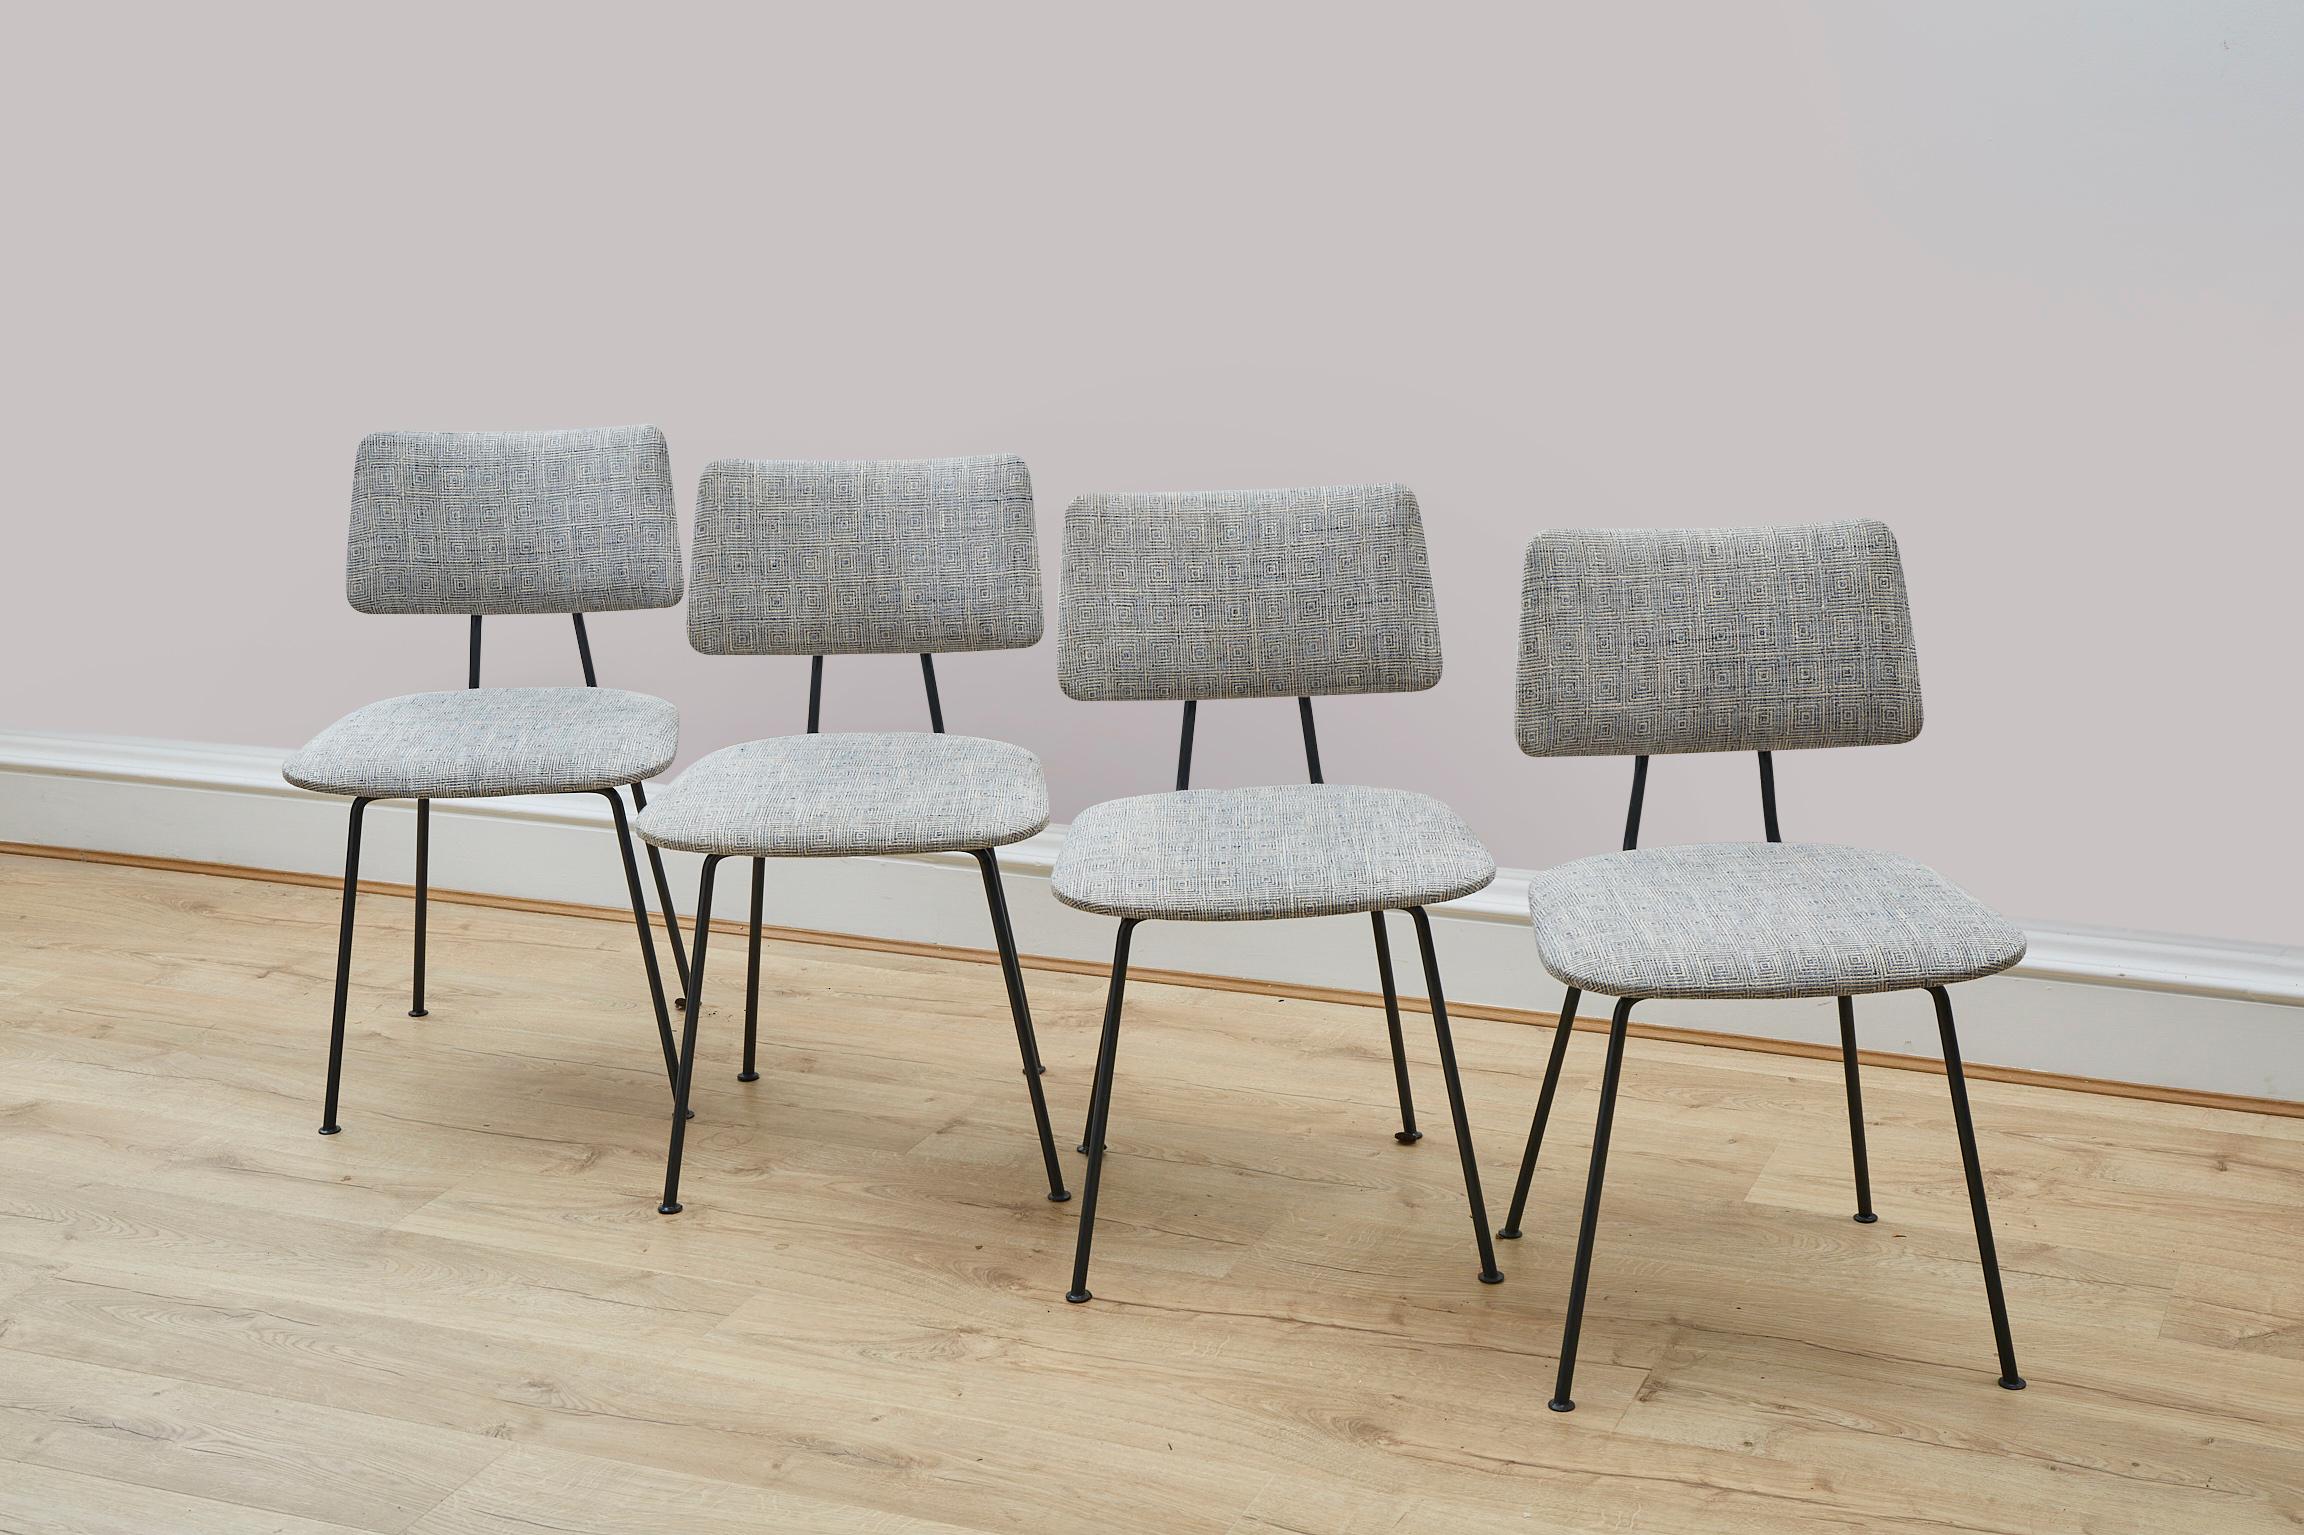 A fantastic rare set of 4 dining chairs from Robin day for Hile 1950's These chairs originally designed for the royal festival hall are simply stunning.

This set of 4 chairs has had full restoration.The steel frame has been colour matched and